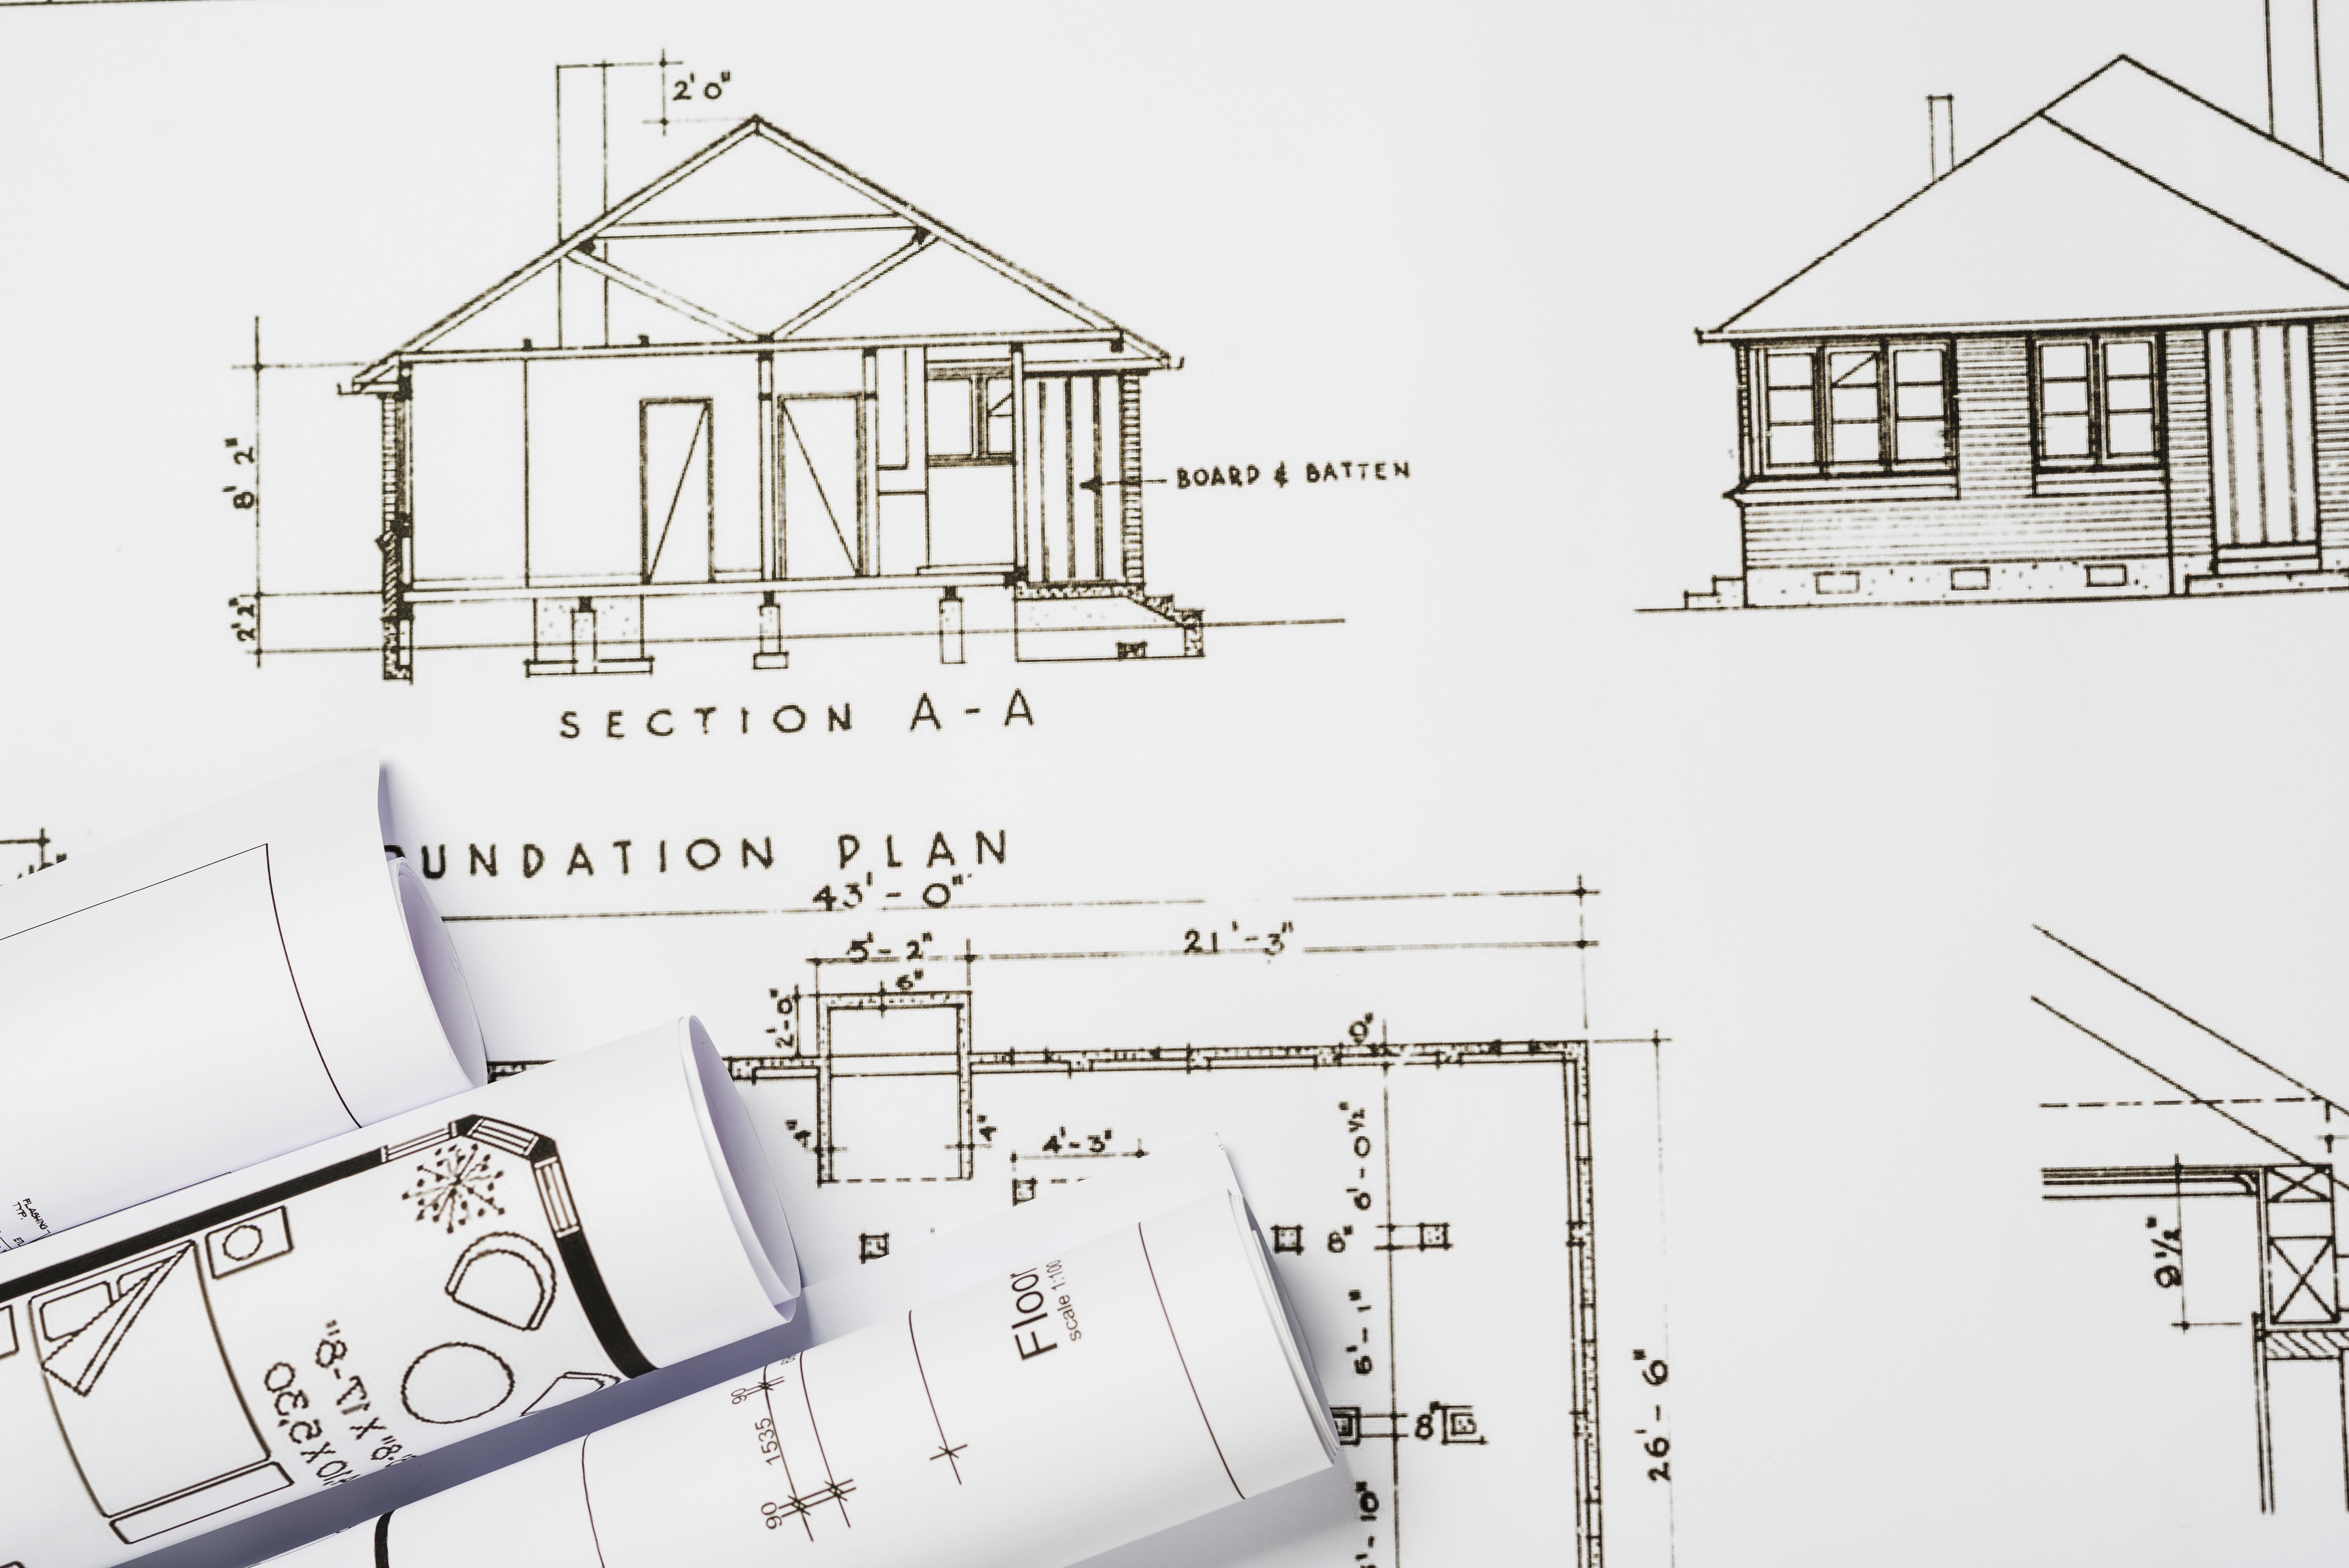 Standard image shows a set of architectural drawings of a house created by one of the By a Reliable Architect in Ottawa.  Also appearing are a set of 3 rolled up blueprint drawings laying on top of the original plans.